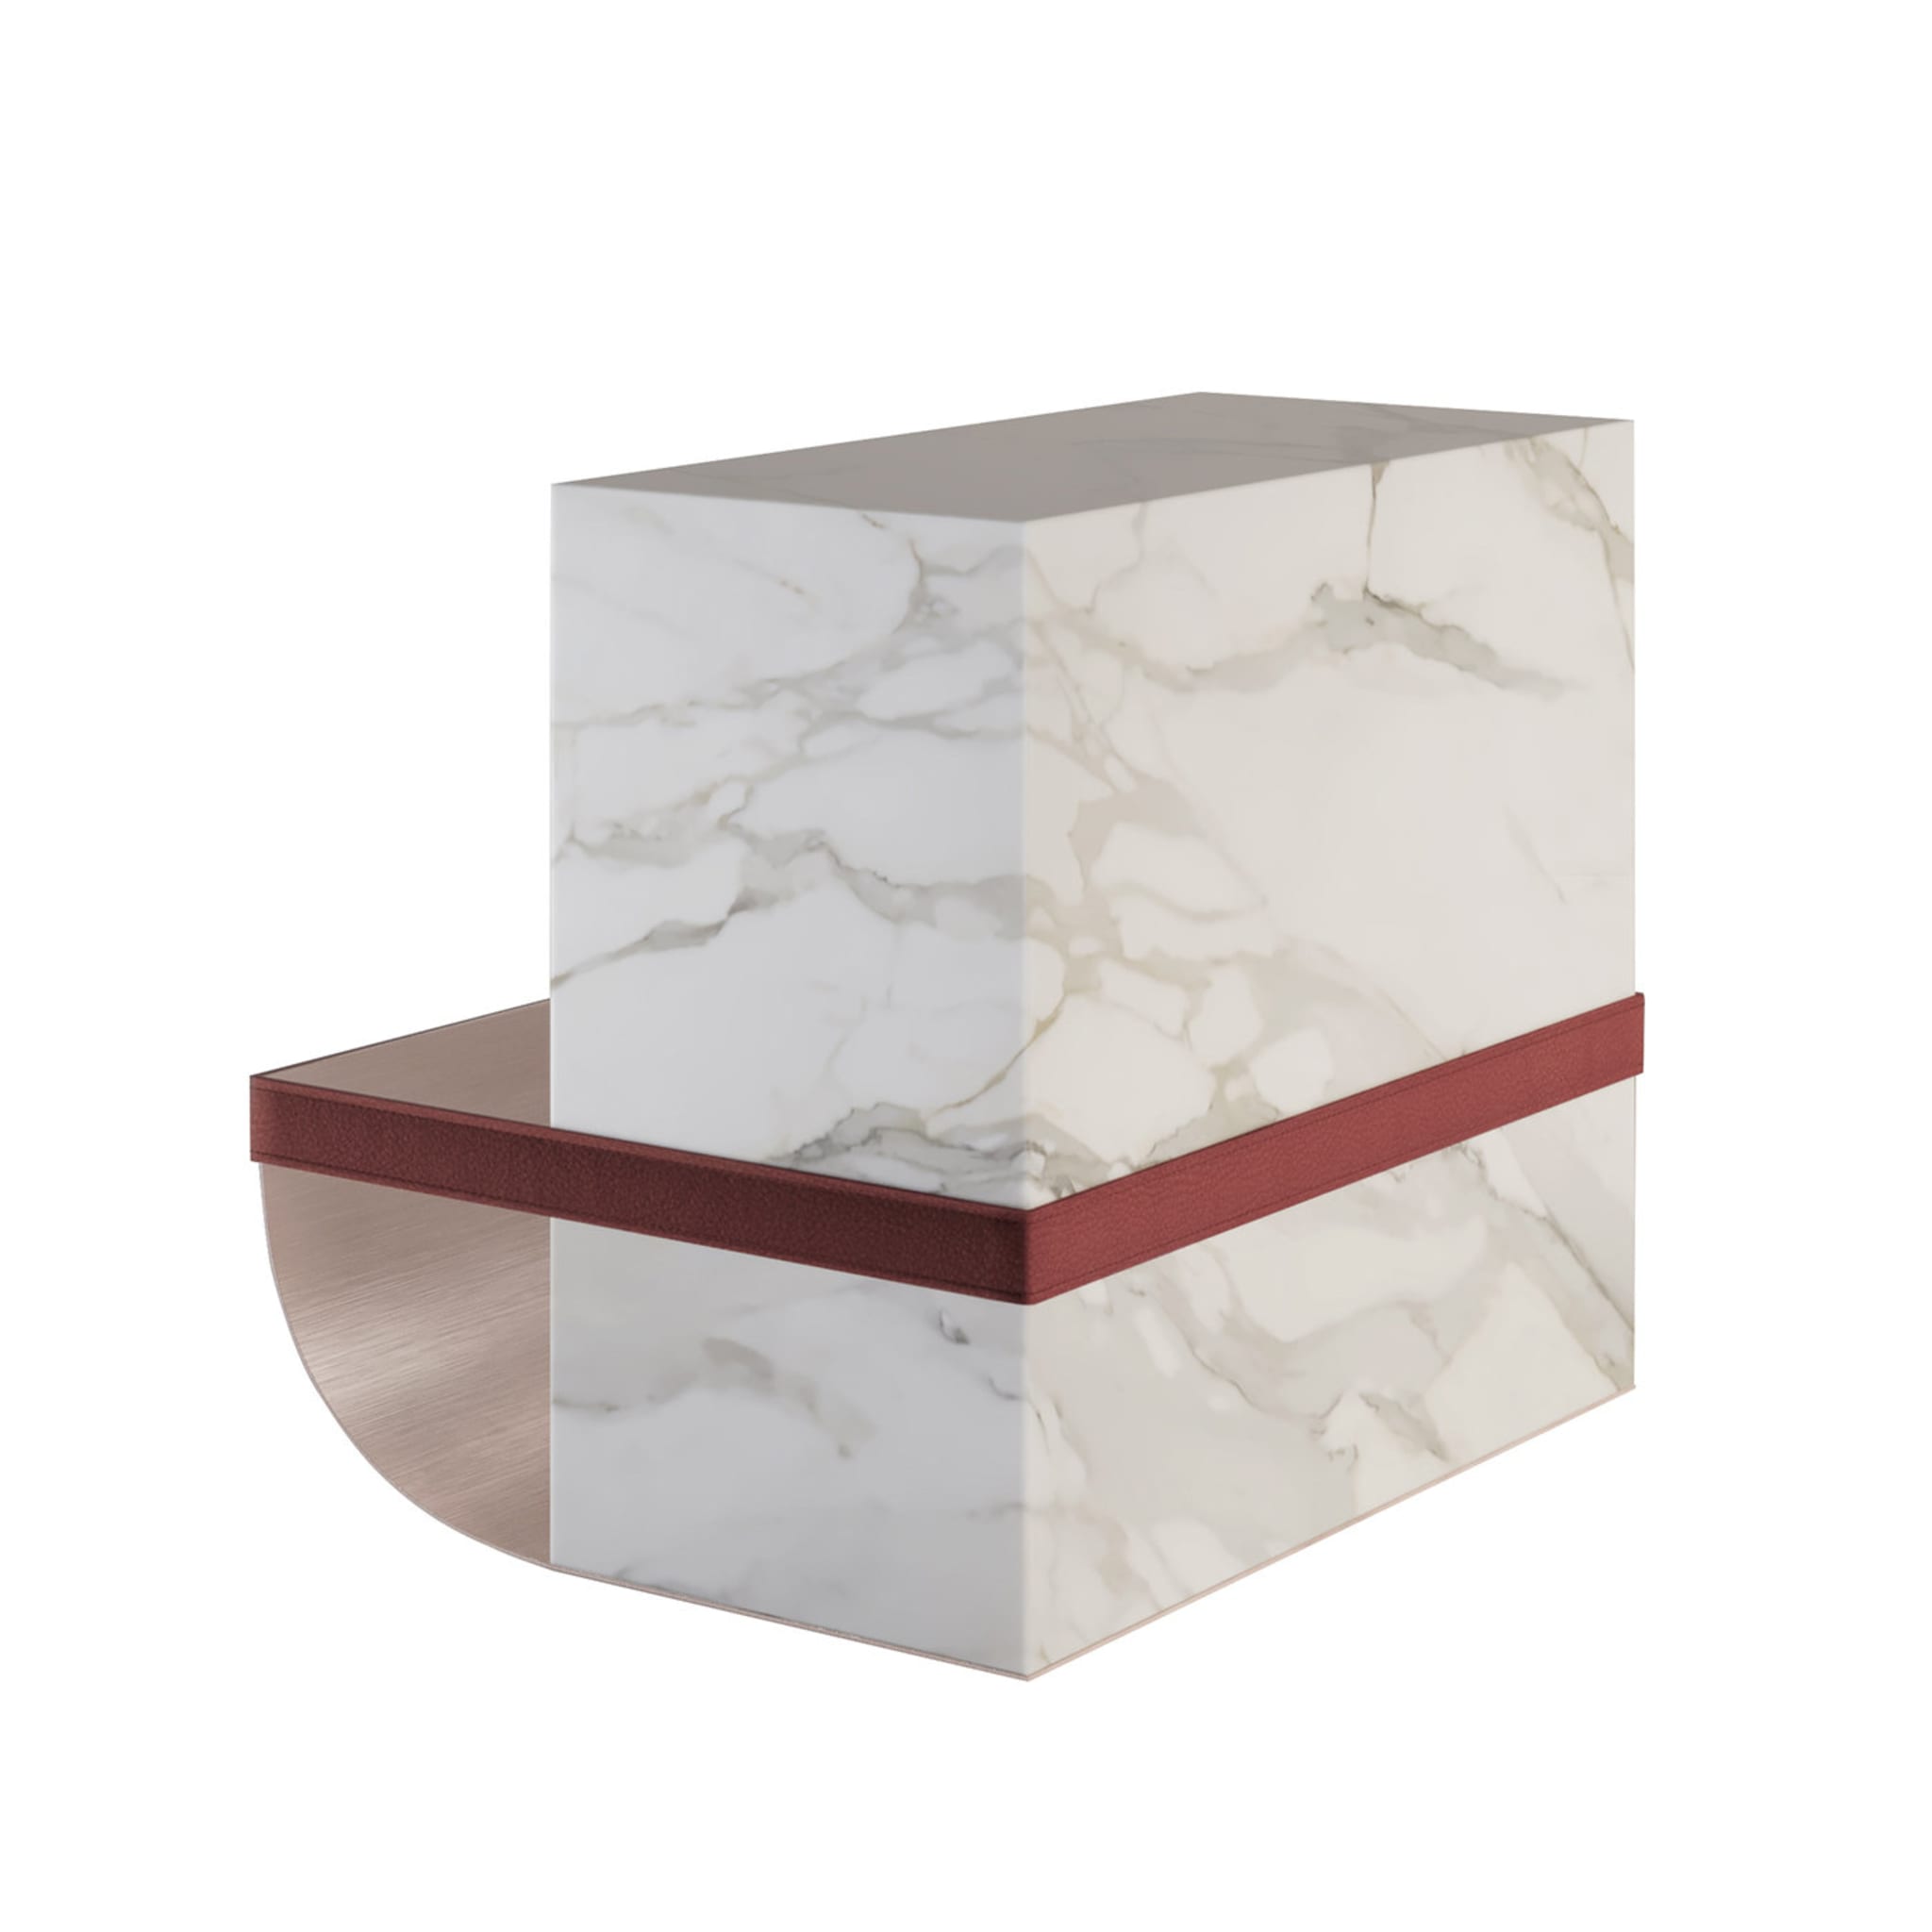 Ambrogio Side Table with Red Leather - Alternative view 1